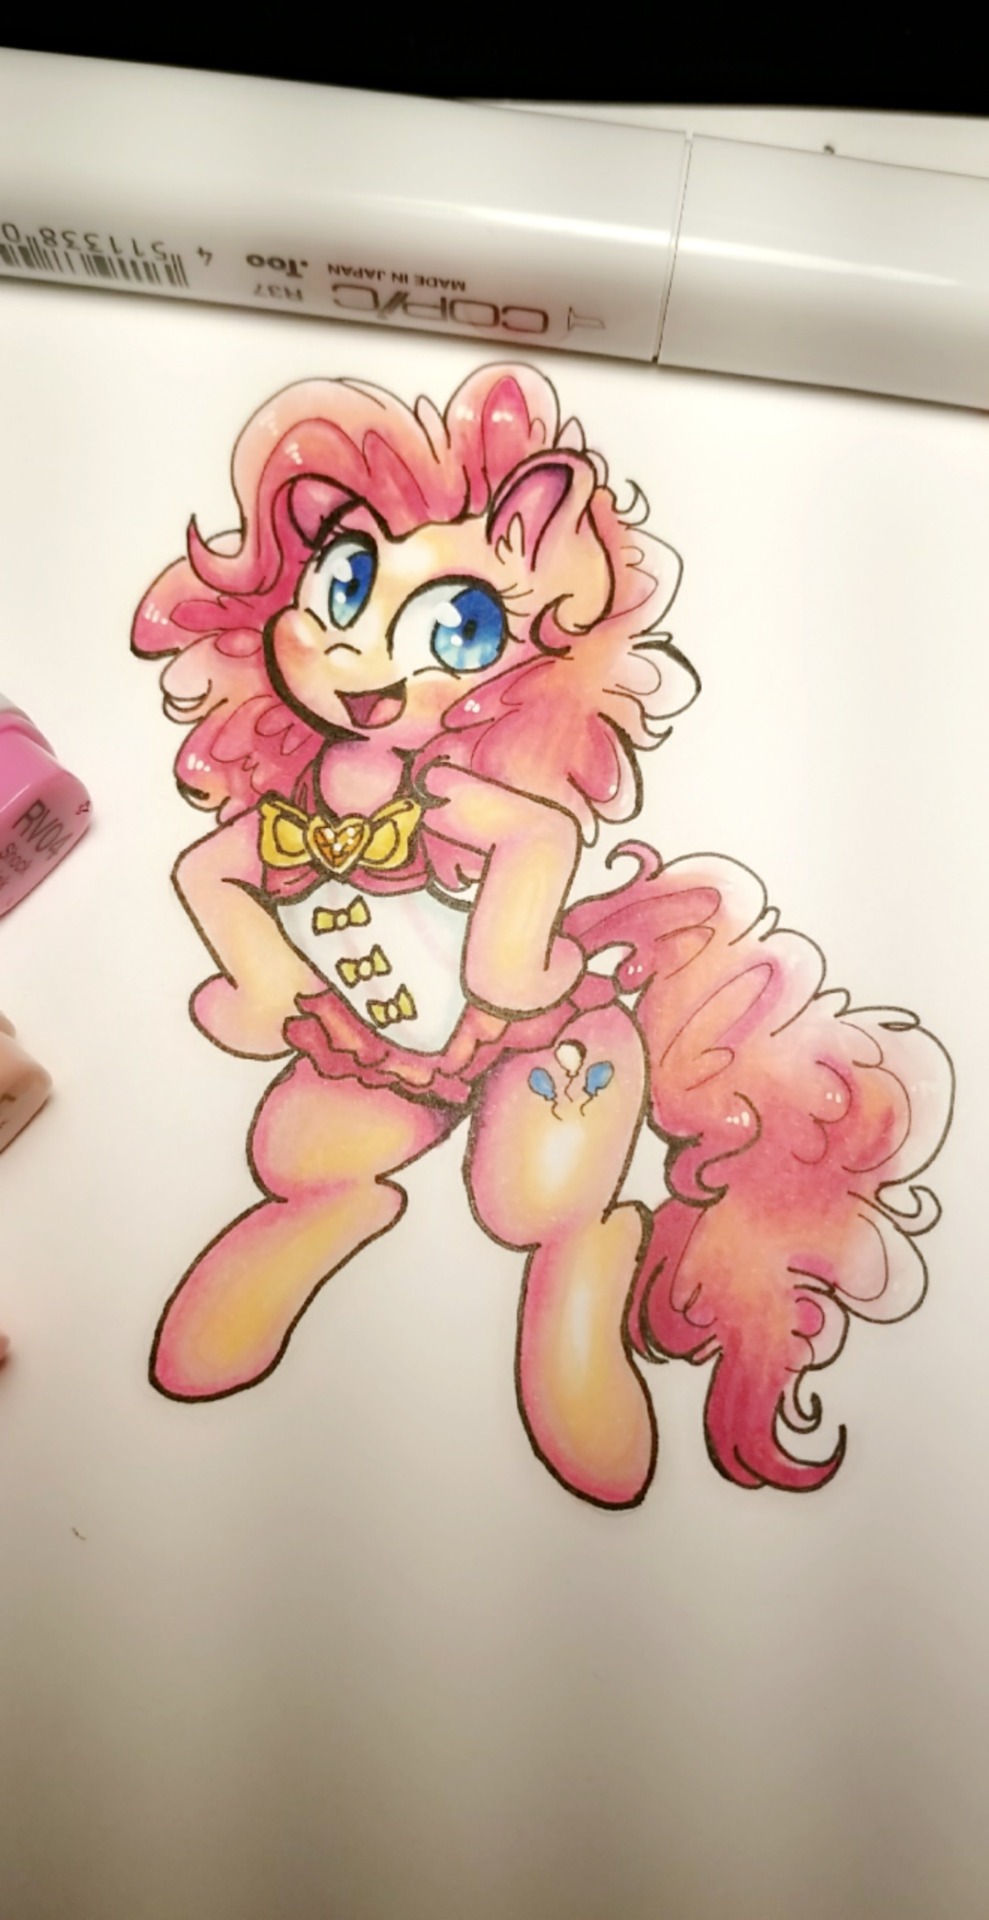 wickedsilly:It’s midnight for me but I got copics for the first time ever and I